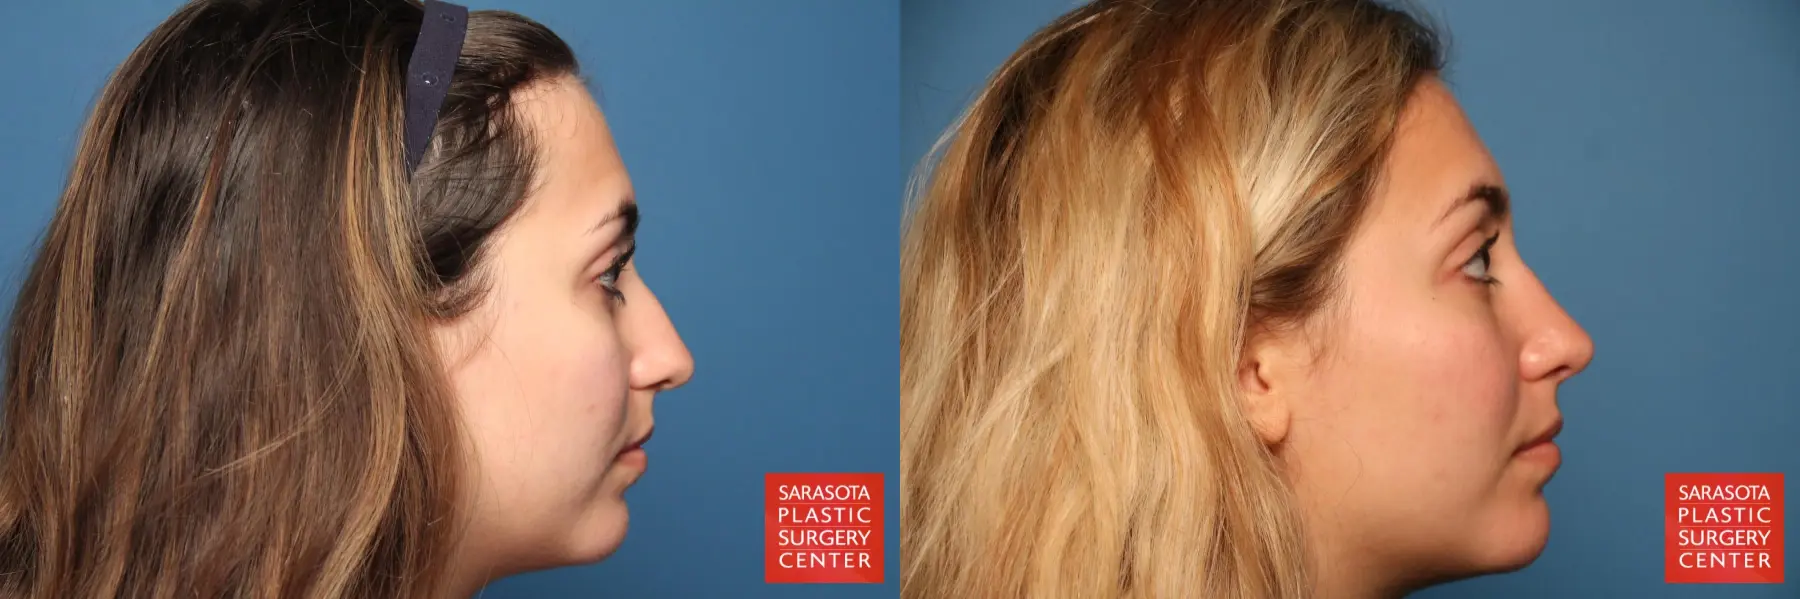 Rhinoplasty: Patient 2 - Before and After 5